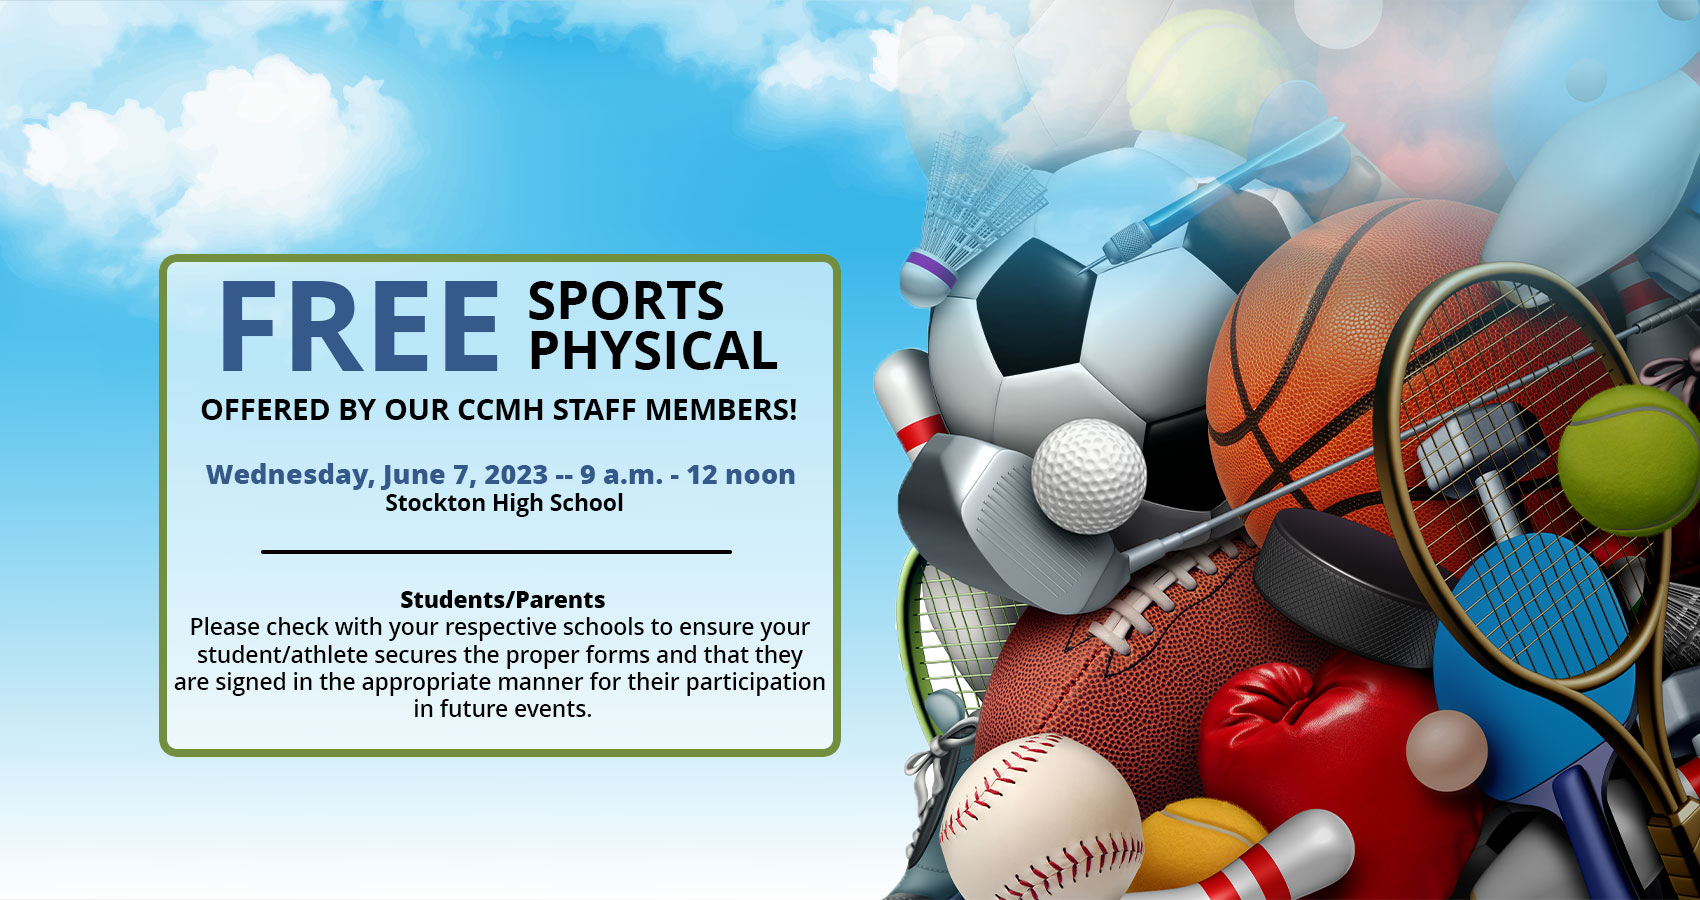 PLEASE MAKE NOTE OF THESE UPCOMING FREE SPORTS PHYSICAL DATES - OFFERED BY OUR CCMH STAFF MEMBERS!!

Thursday, May 11, 2023 -- 9 a.m. - 12 noon - Northeast Vernon County High School in Walker, MO

Tuesday, May 16, 2023 -- 9 a.m. - 3 p.m. -- El Dorado Springs High School

Wednesday, June 7, 2023 -- 9 a.m. - 12 noon -- Stockton High School

Students/Parents -- Please check with your respective schools to ensure your student/athlete secures the proper forms and that they are signed in the appropriate manner for their participation in future events.